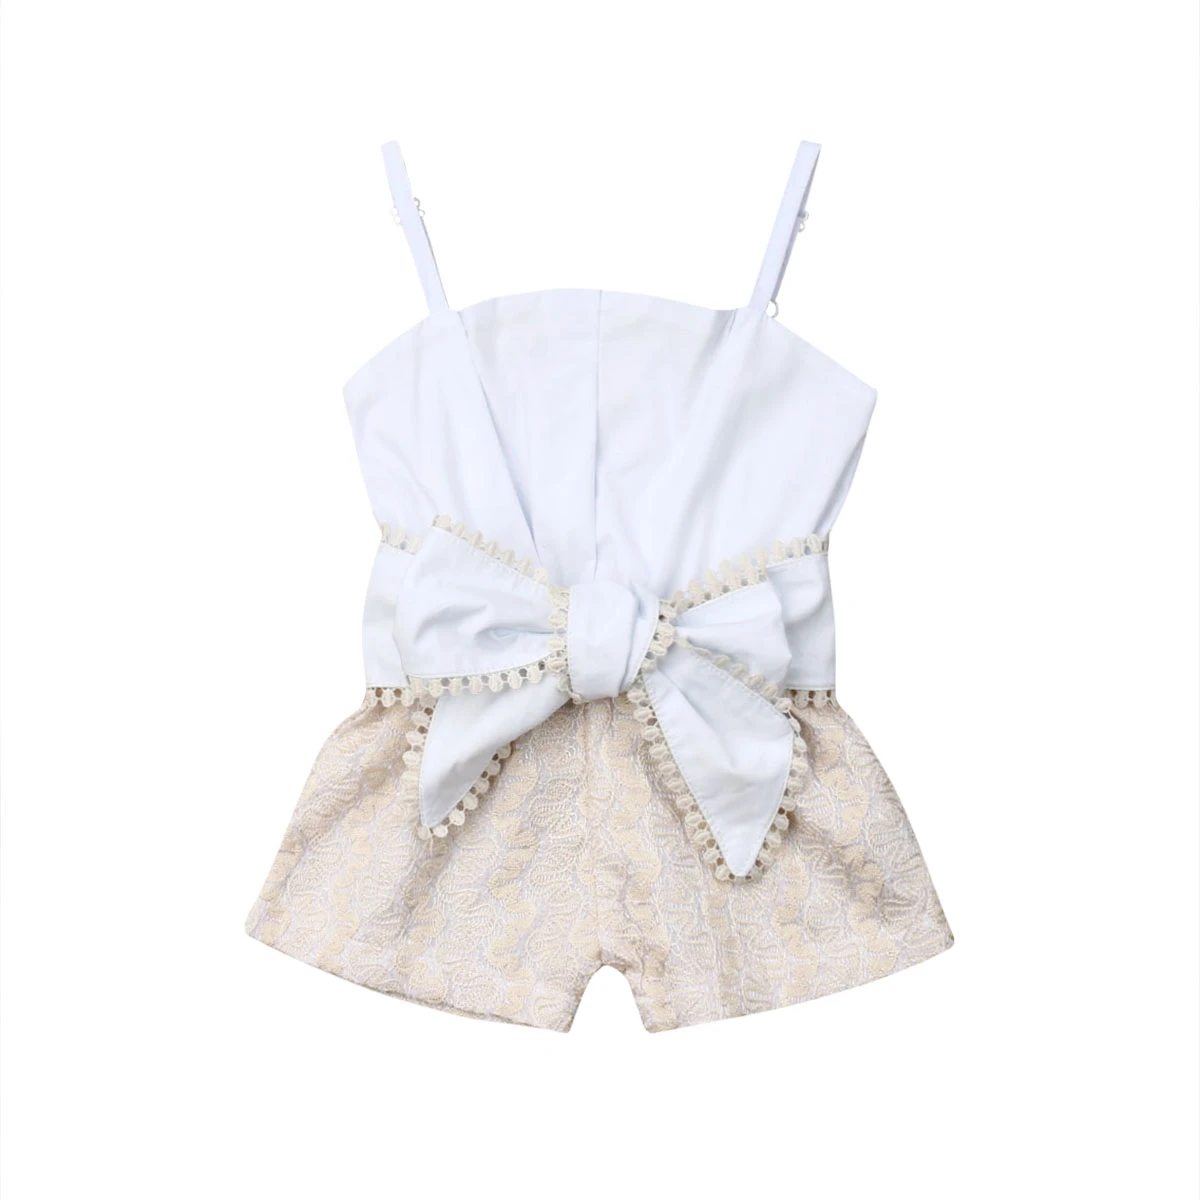 Infant Kid Baby Girl 1-4Y Summer Romper Lace Sling Openwork Bow Rompers Top Sunsuit Clothes Sets cheap baby bodysuits	